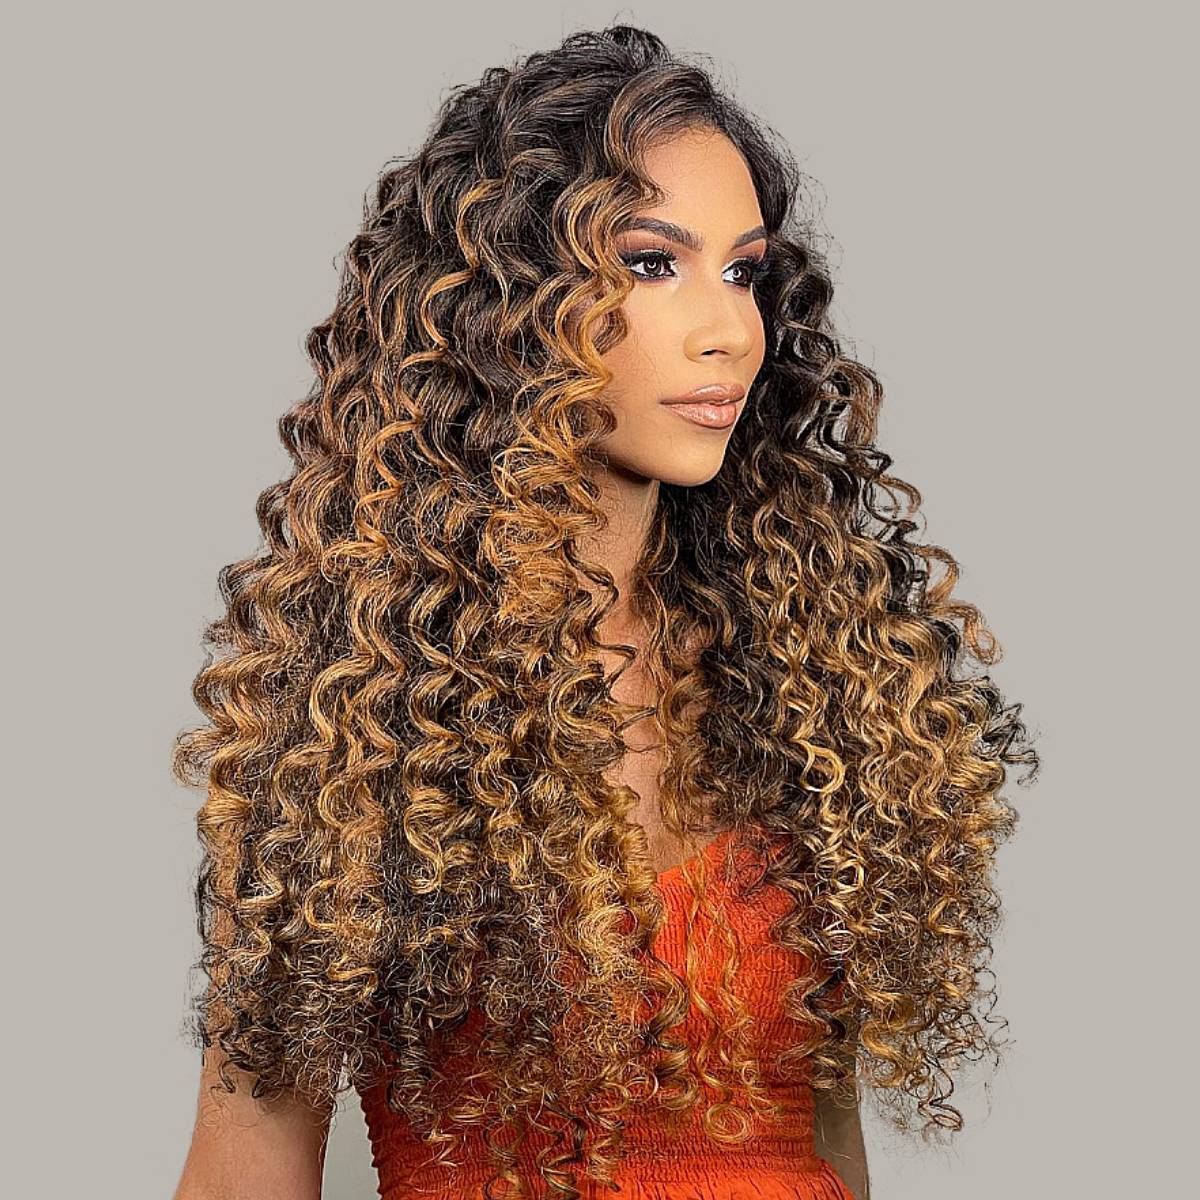 Kinky Curly Hair 25 Hairstyle Ideas for Your Curls  All Things Hair US